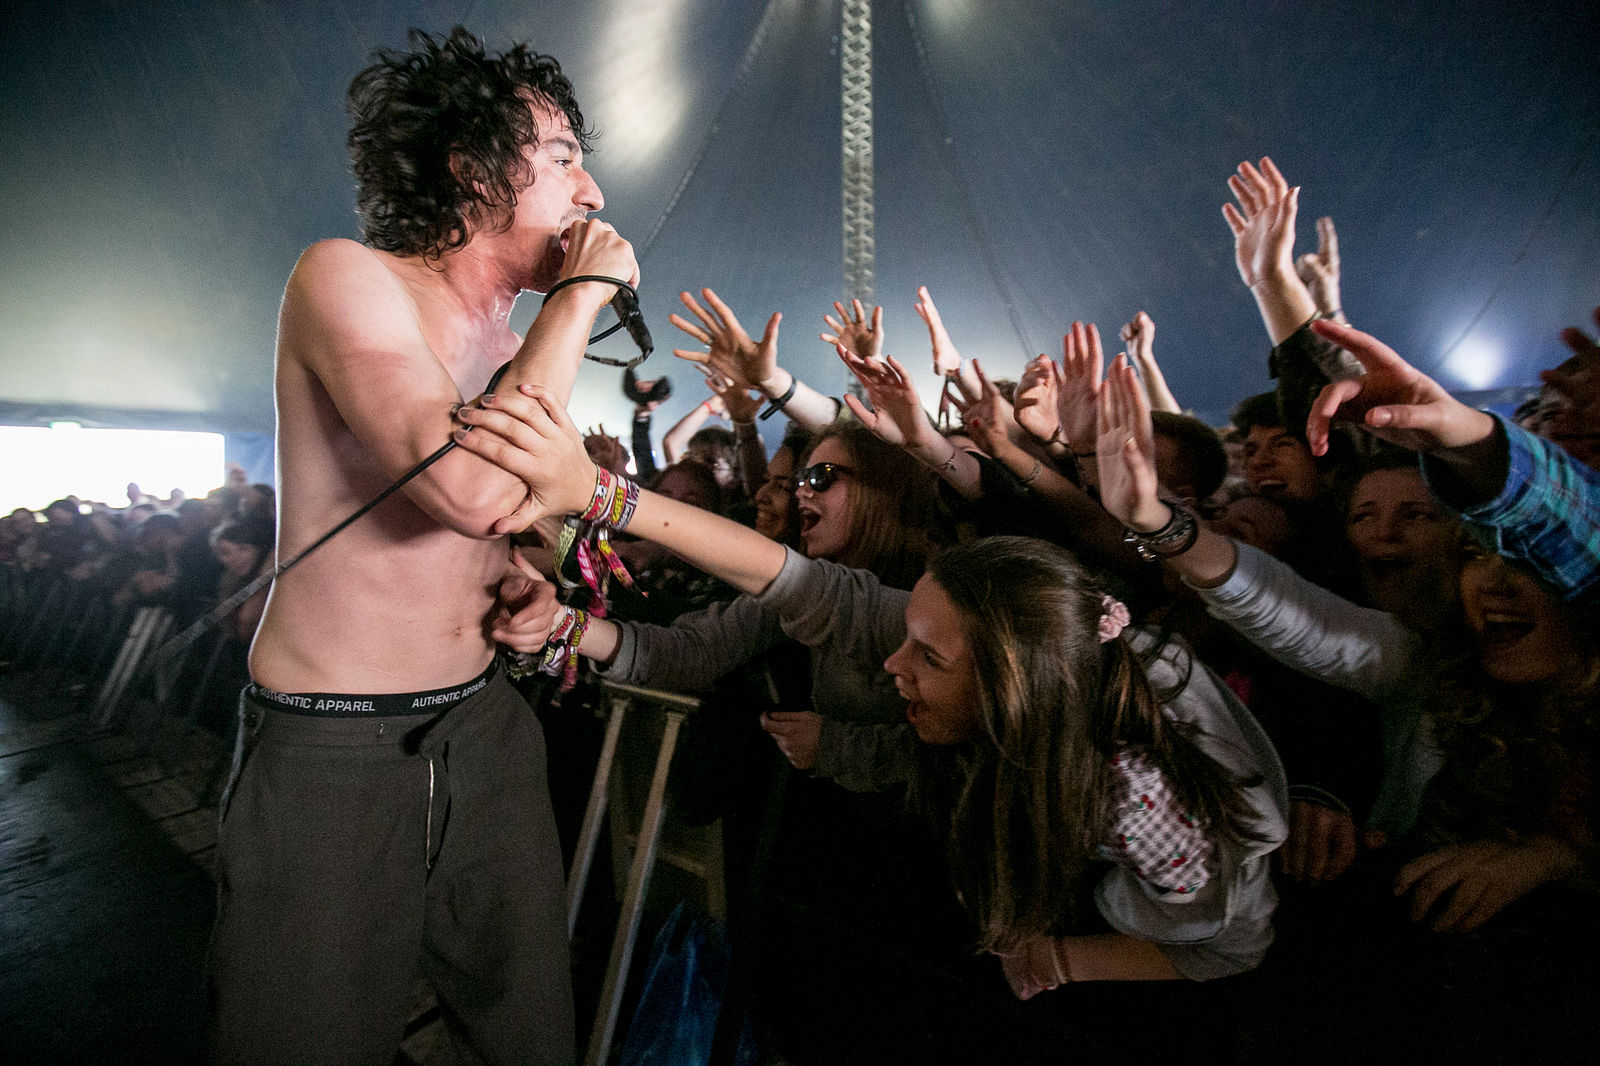 The Fat White Family